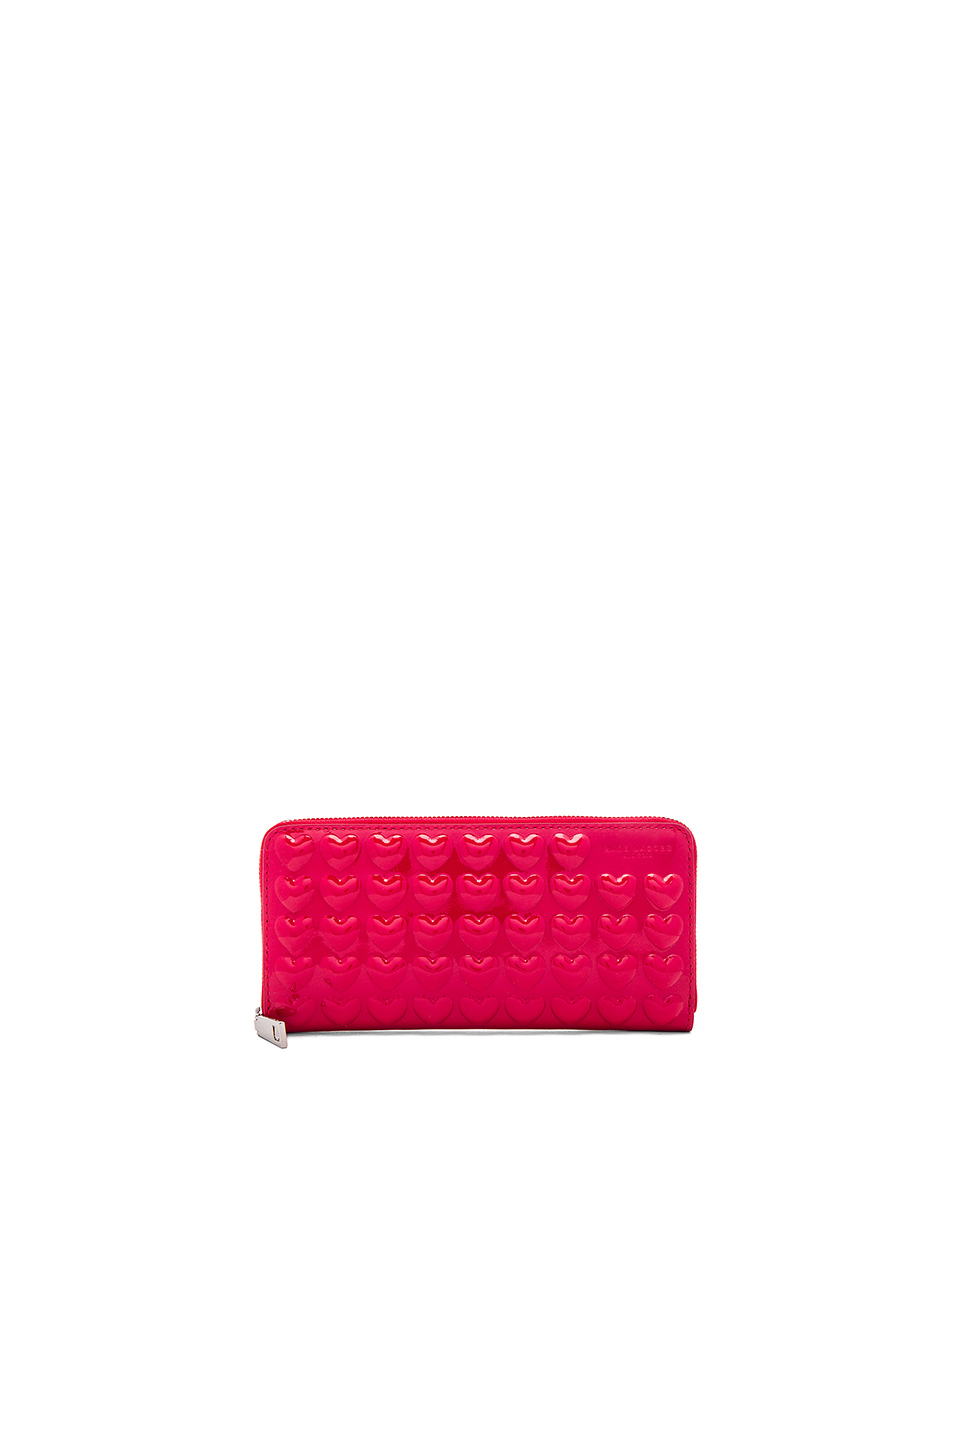 MARC JACOBS Embossed Solid Heart Continental Wallet, Cambridge Red ...